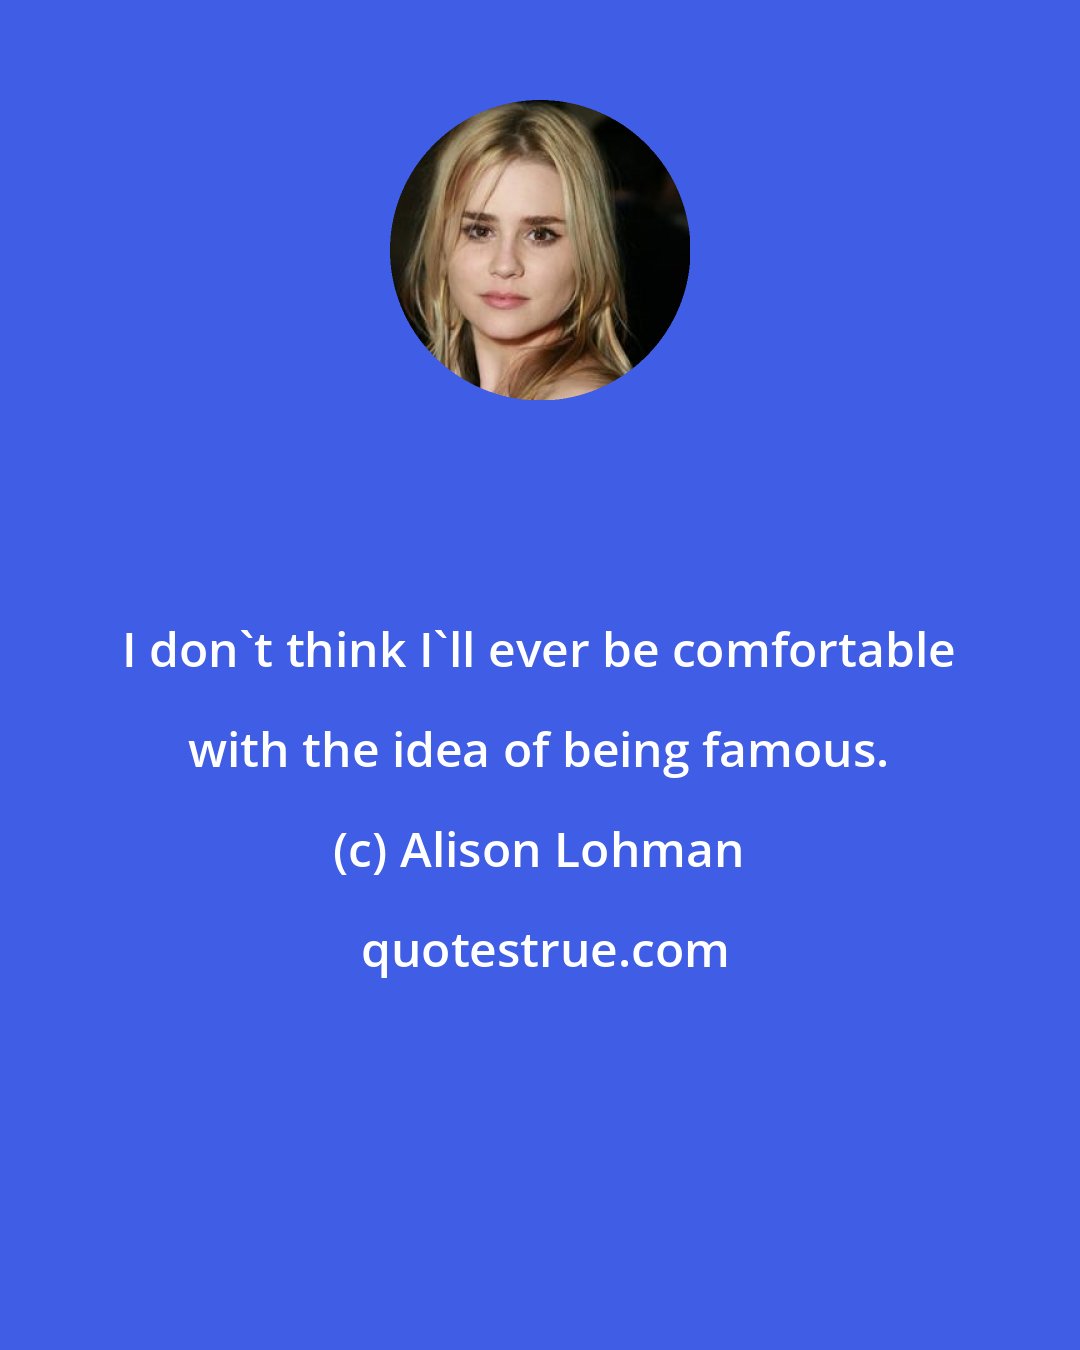 Alison Lohman: I don't think I'll ever be comfortable with the idea of being famous.